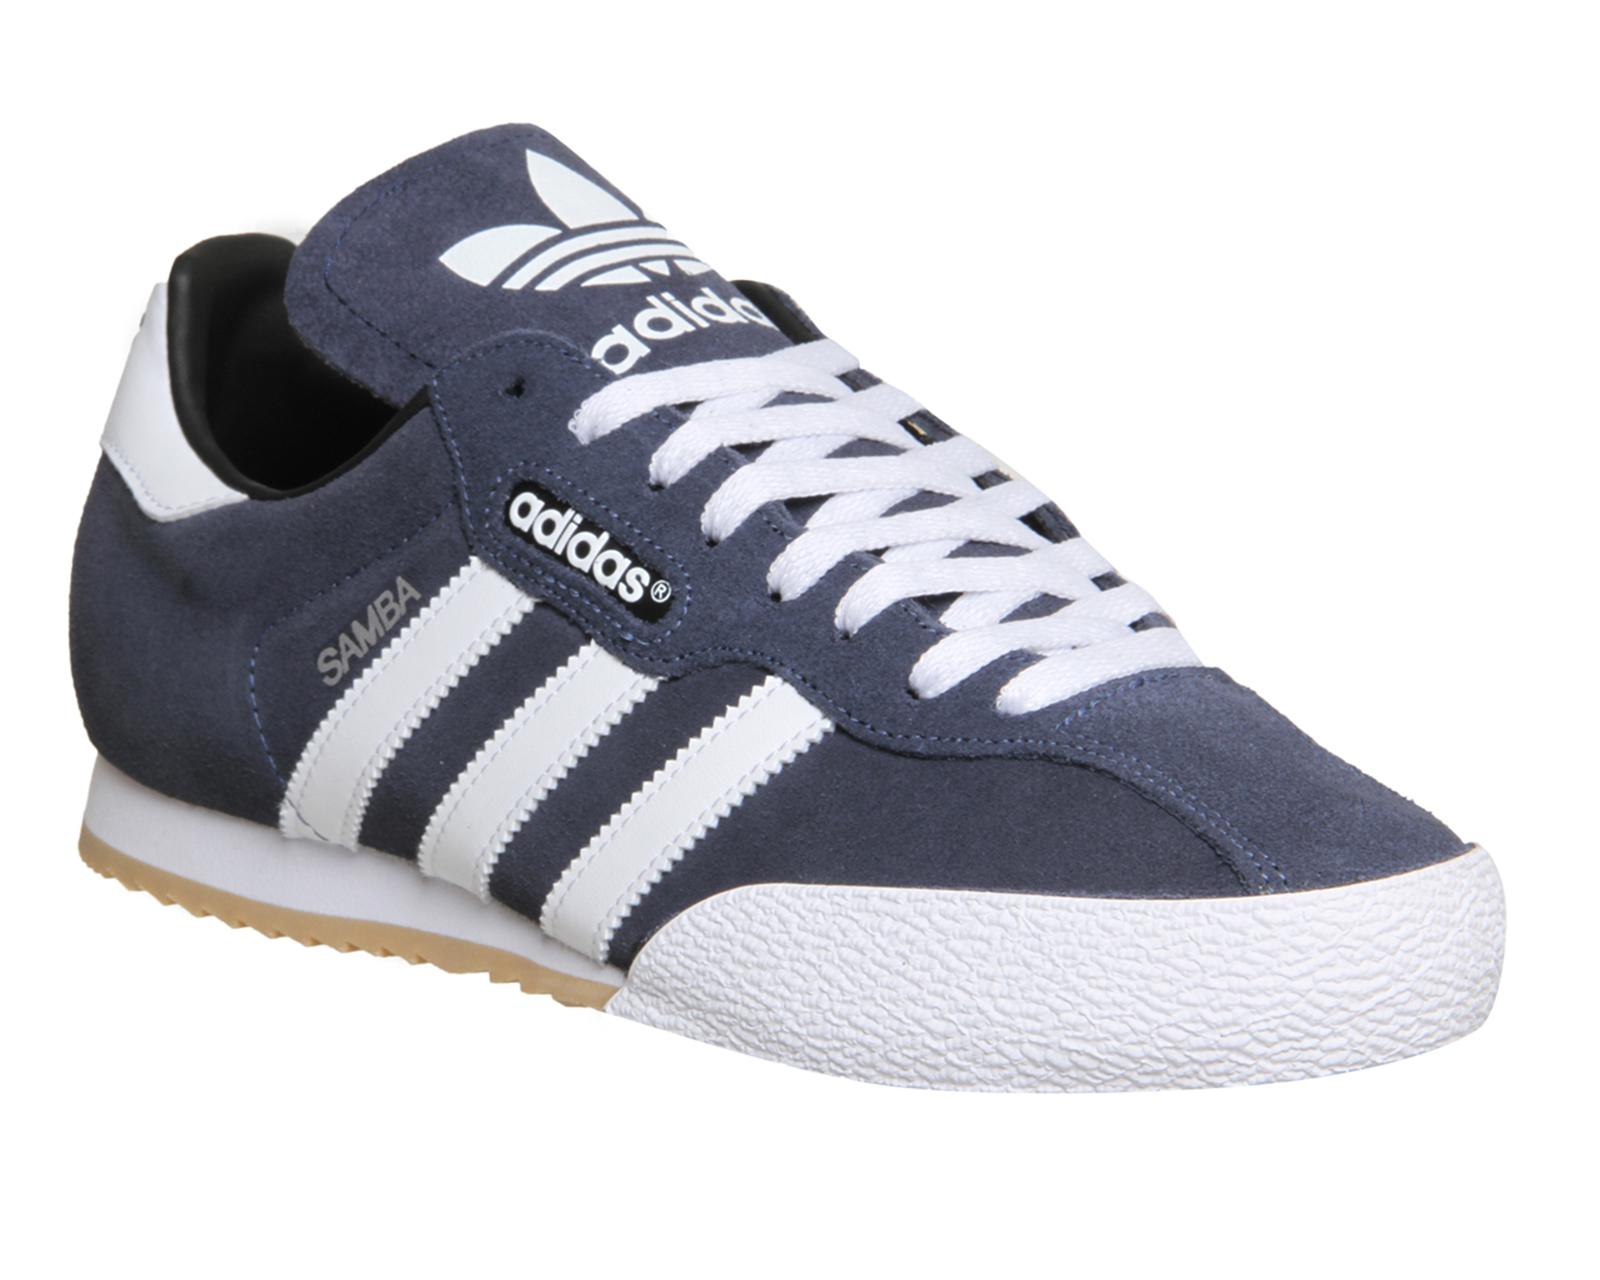 Lyst - Adidas Samba Super Suede Low-Top Sneakers in Blue for Men